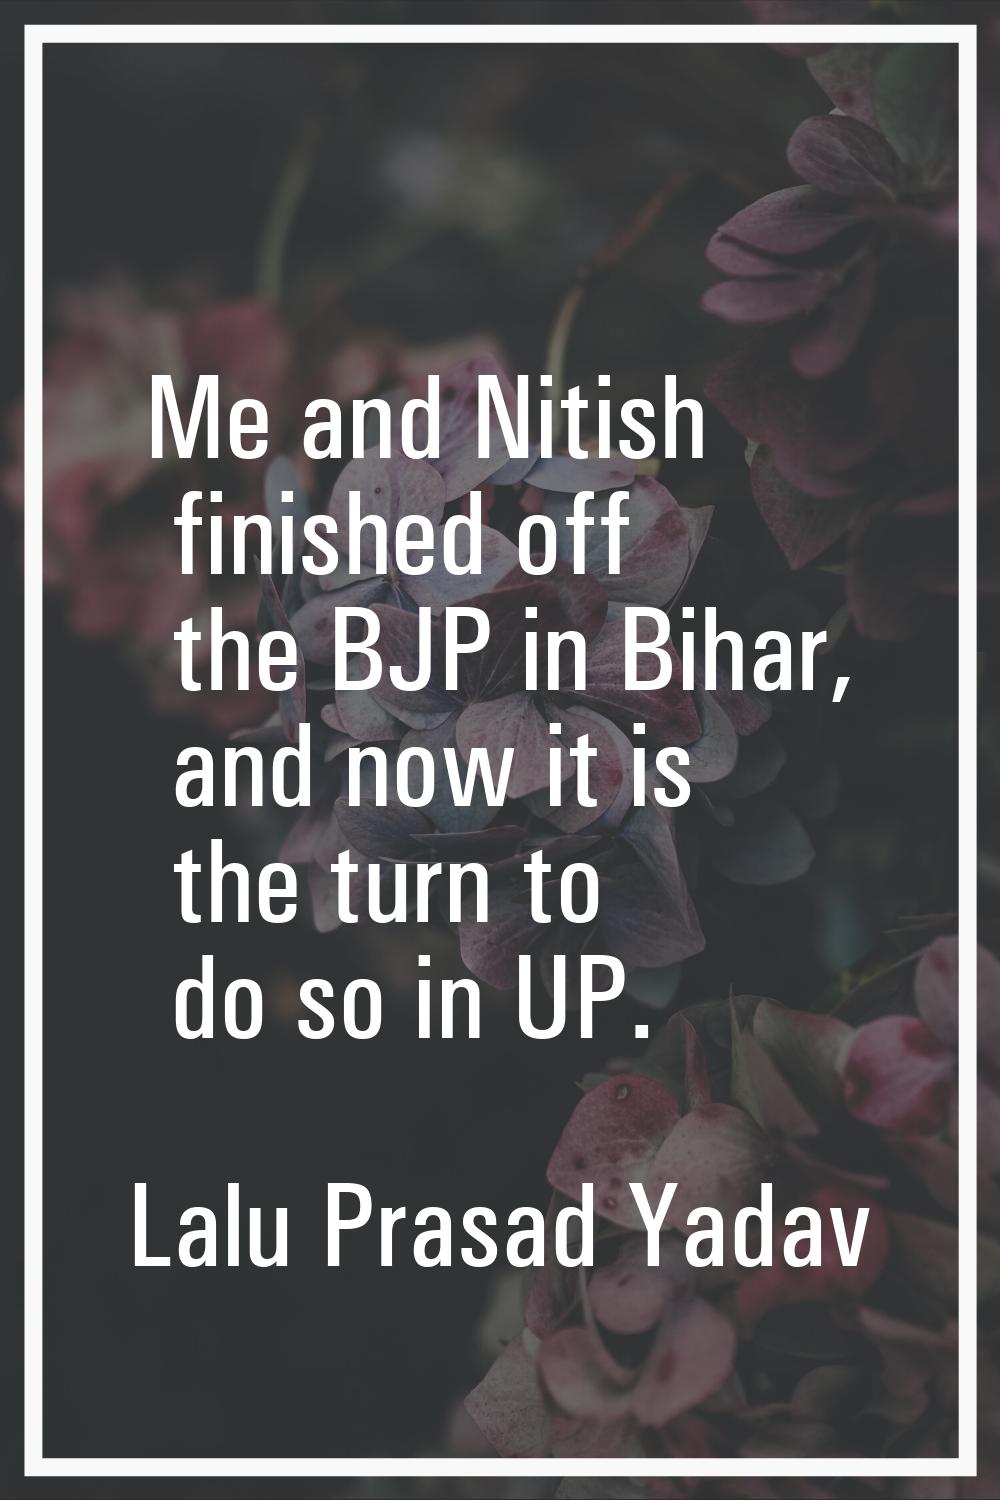 Me and Nitish finished off the BJP in Bihar, and now it is the turn to do so in UP.